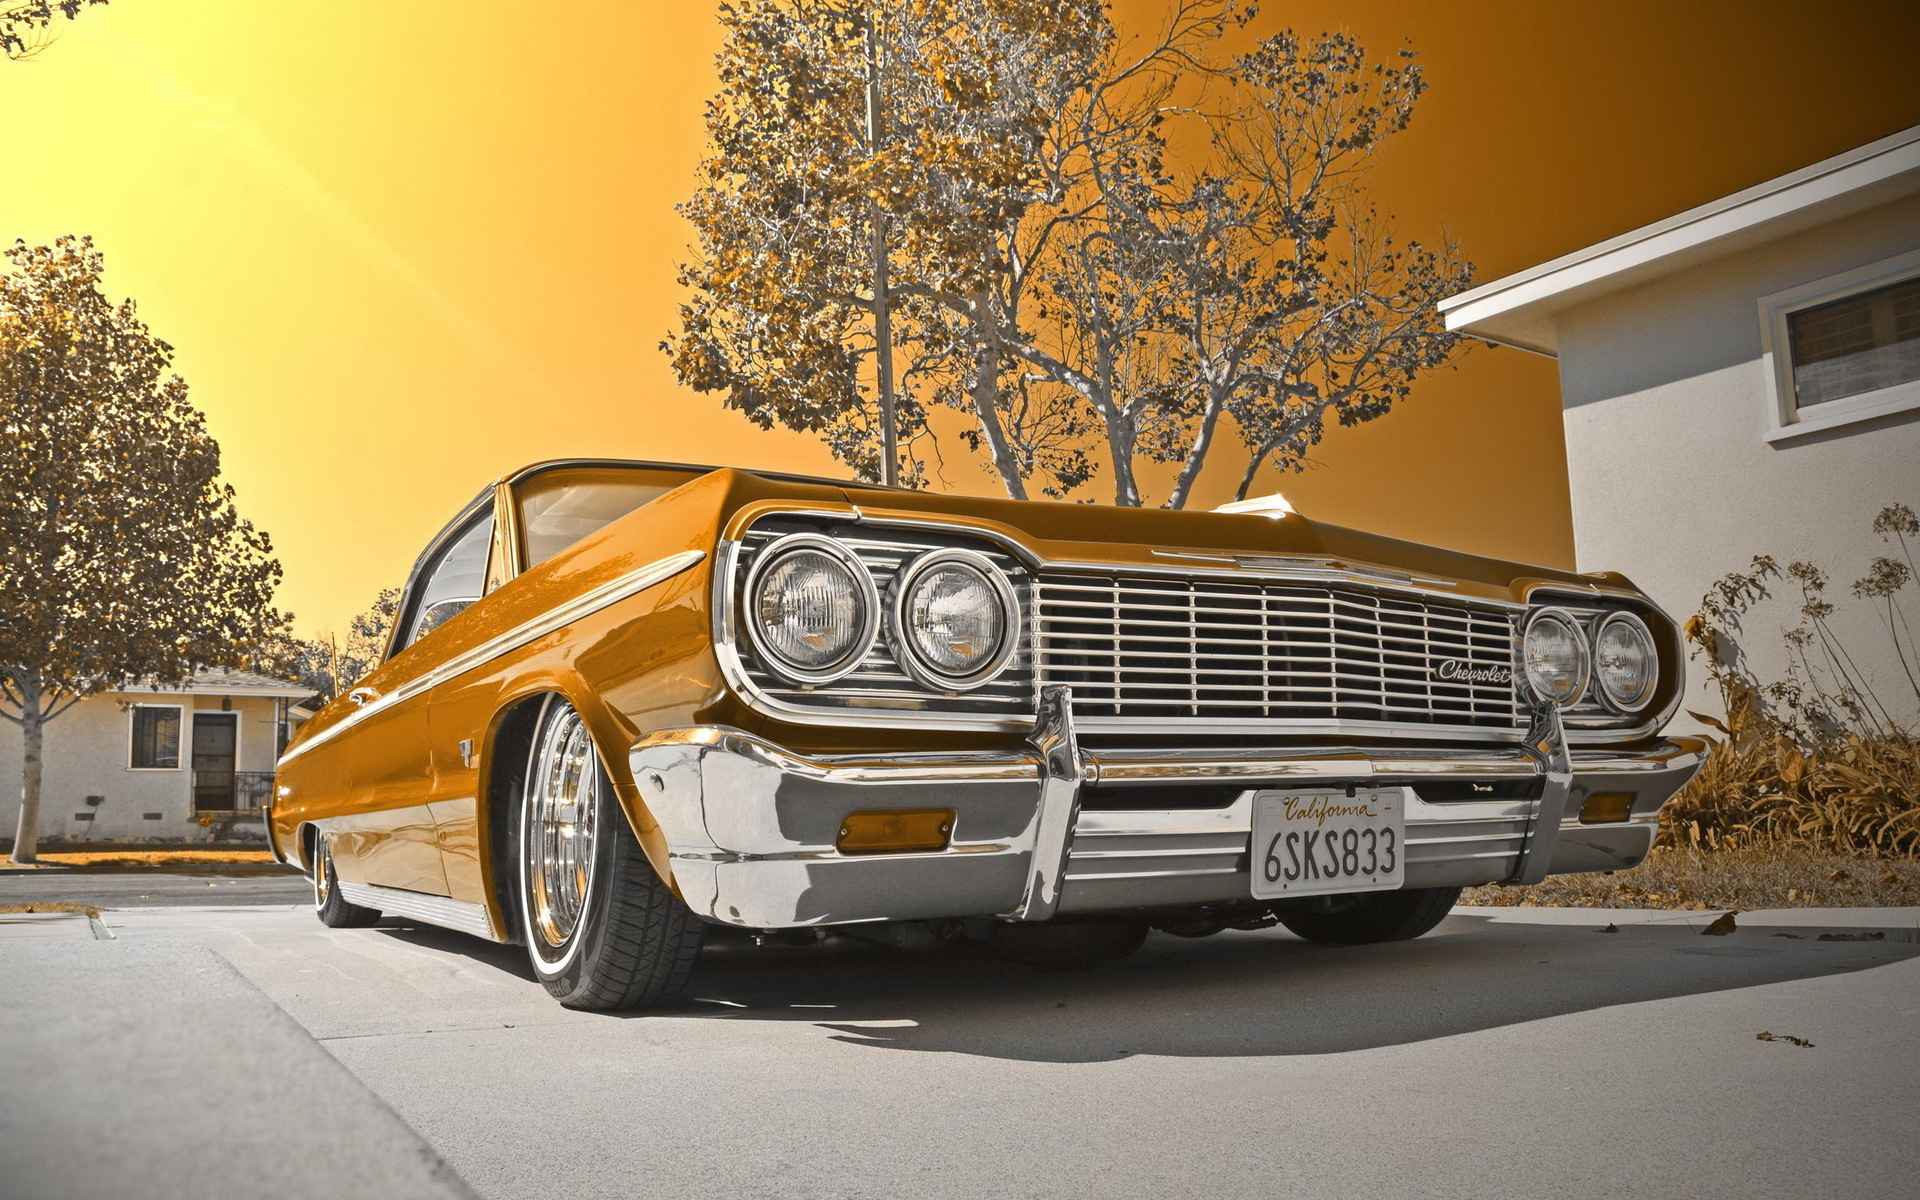 1964 Chevy impala lowrider muscle cars tuning wallpaper